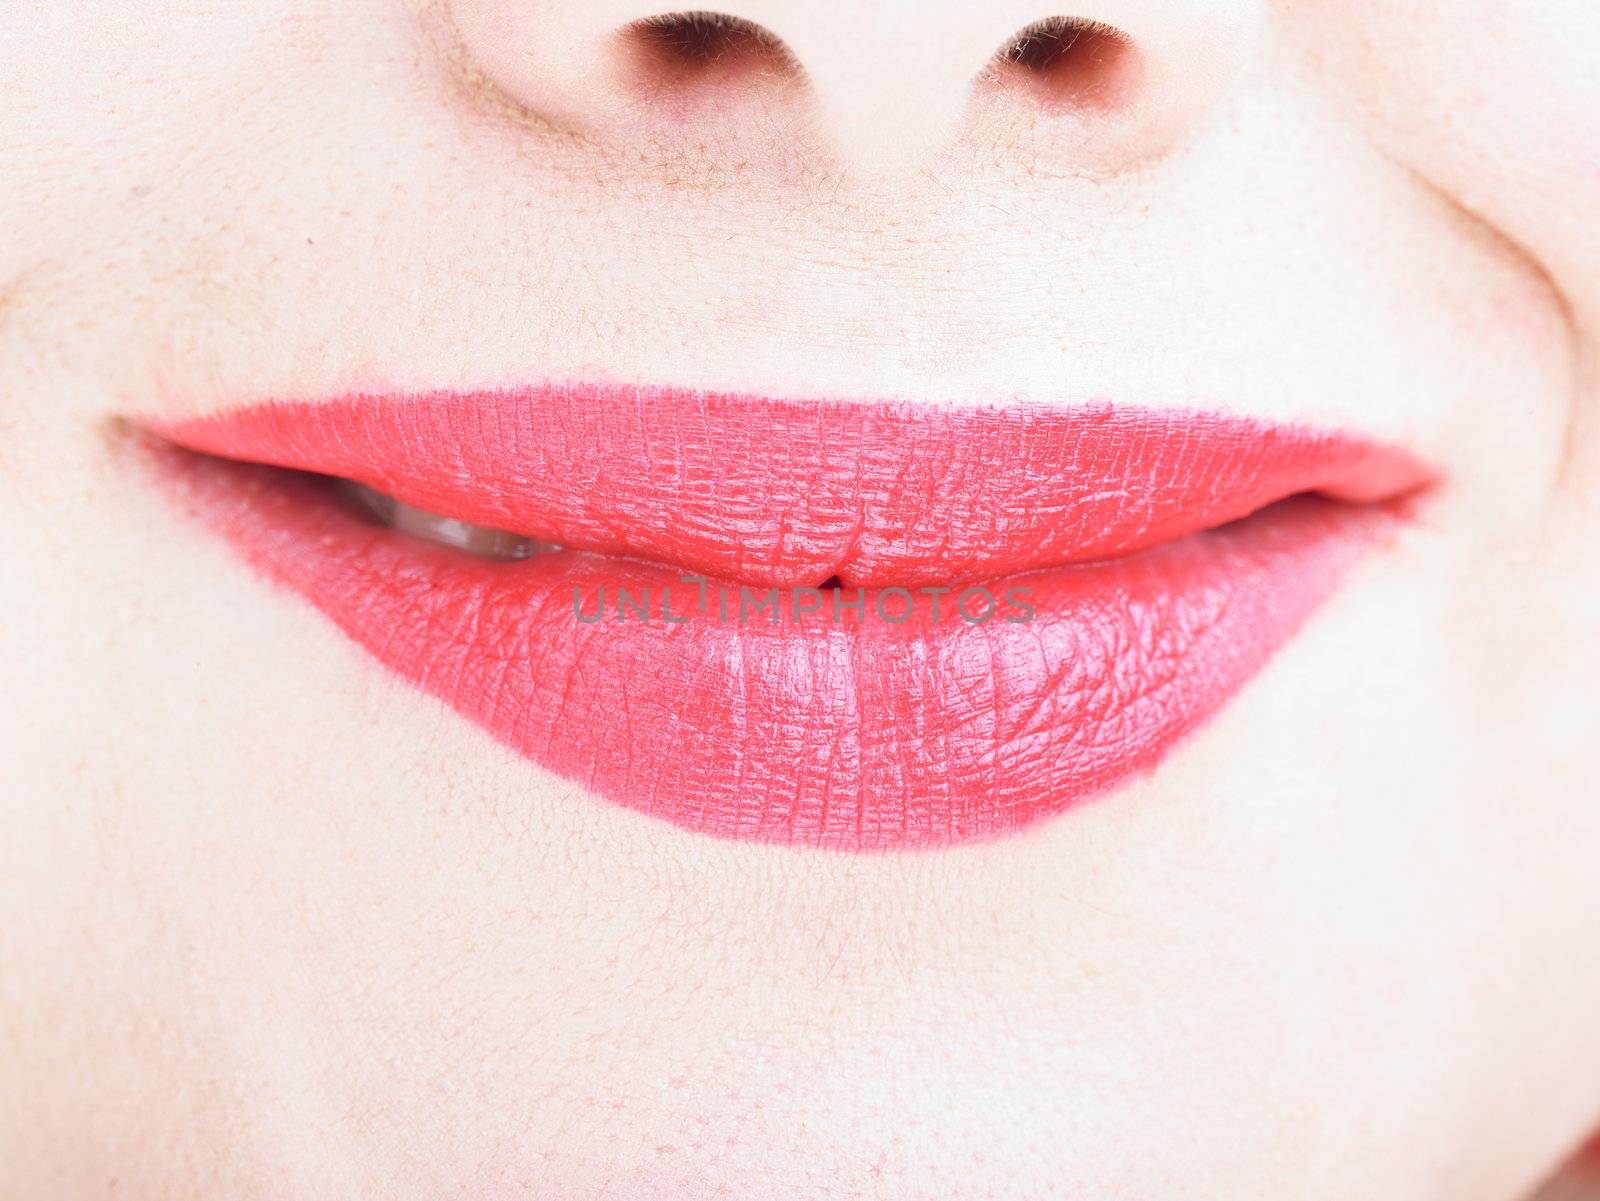 Smiling Woman's Lips by adamr